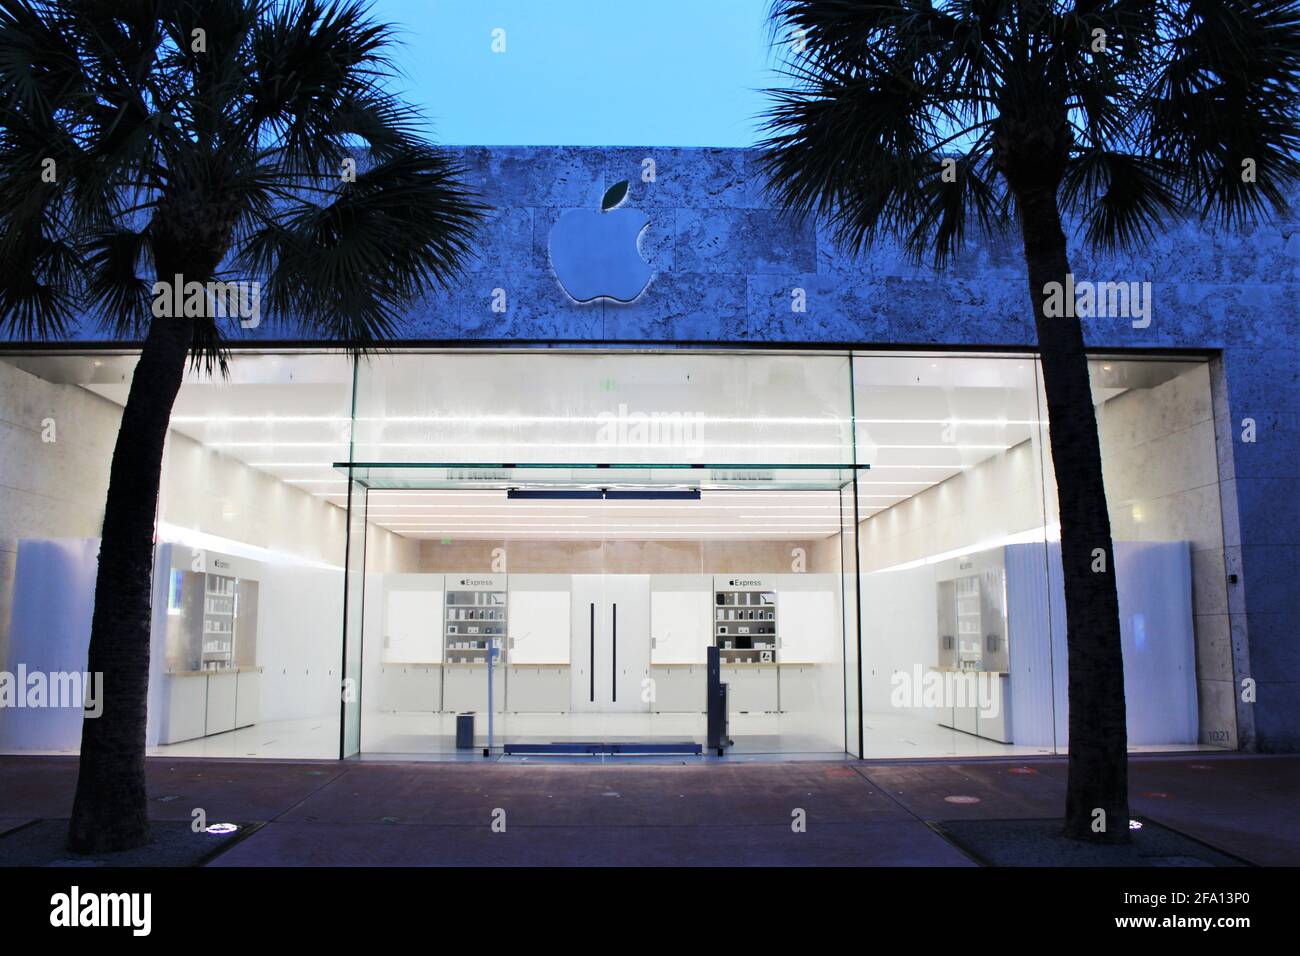 Lincoln Road Apple Store at early morning time. Apple is a major technology company based in California. Empty apple store. Stock Photo